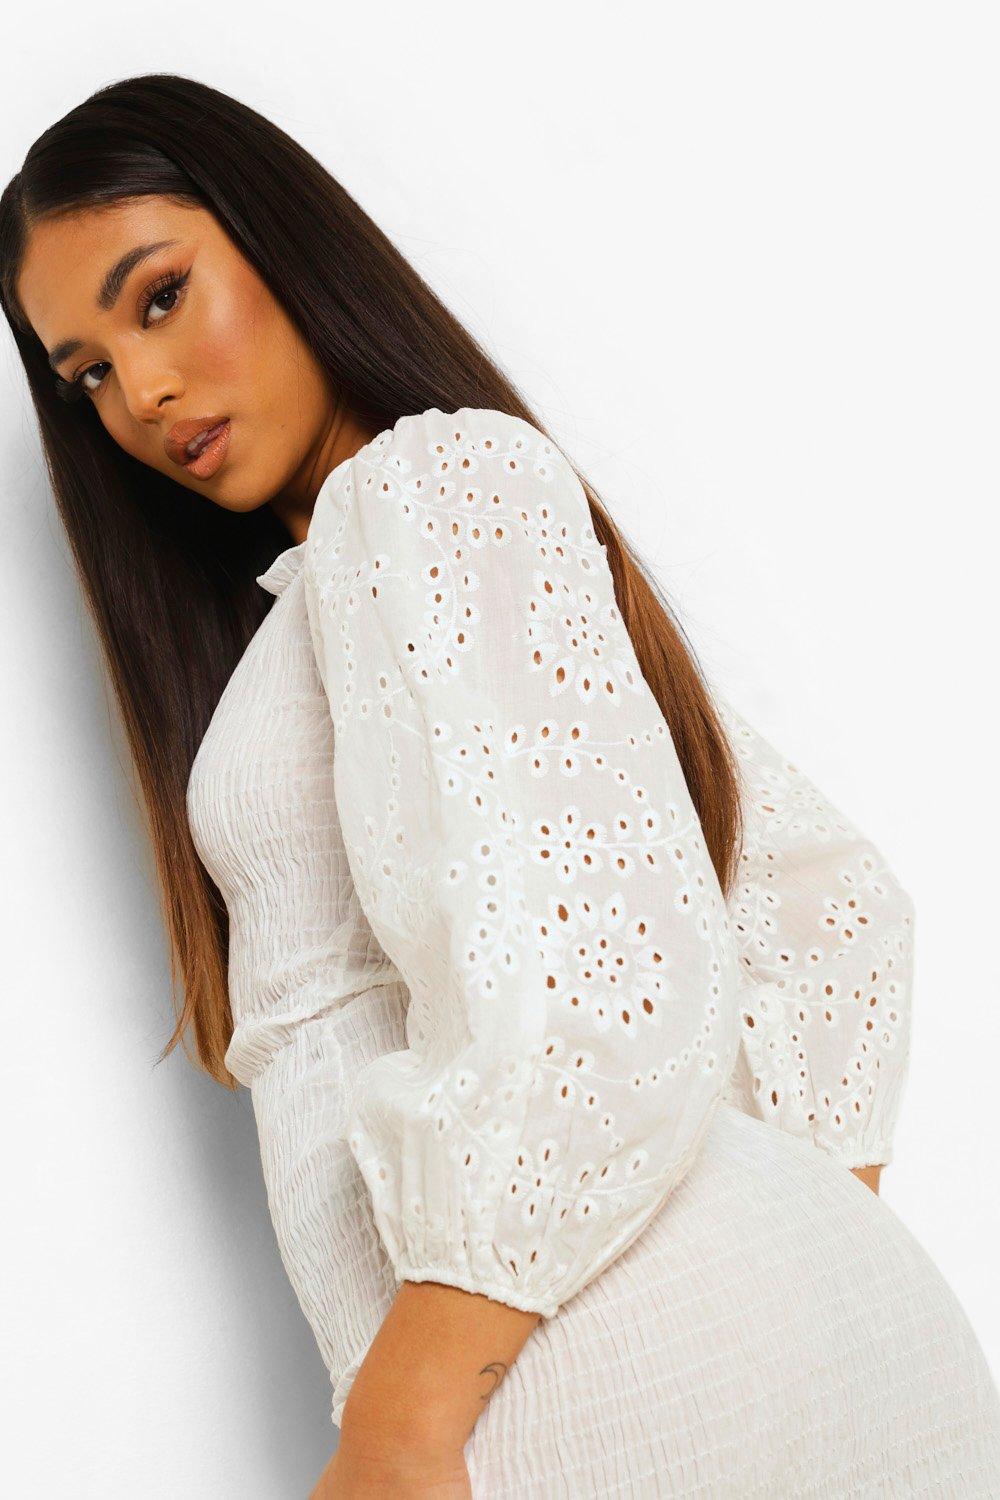 White Lace Sleeve Shirred Bodycon Dress